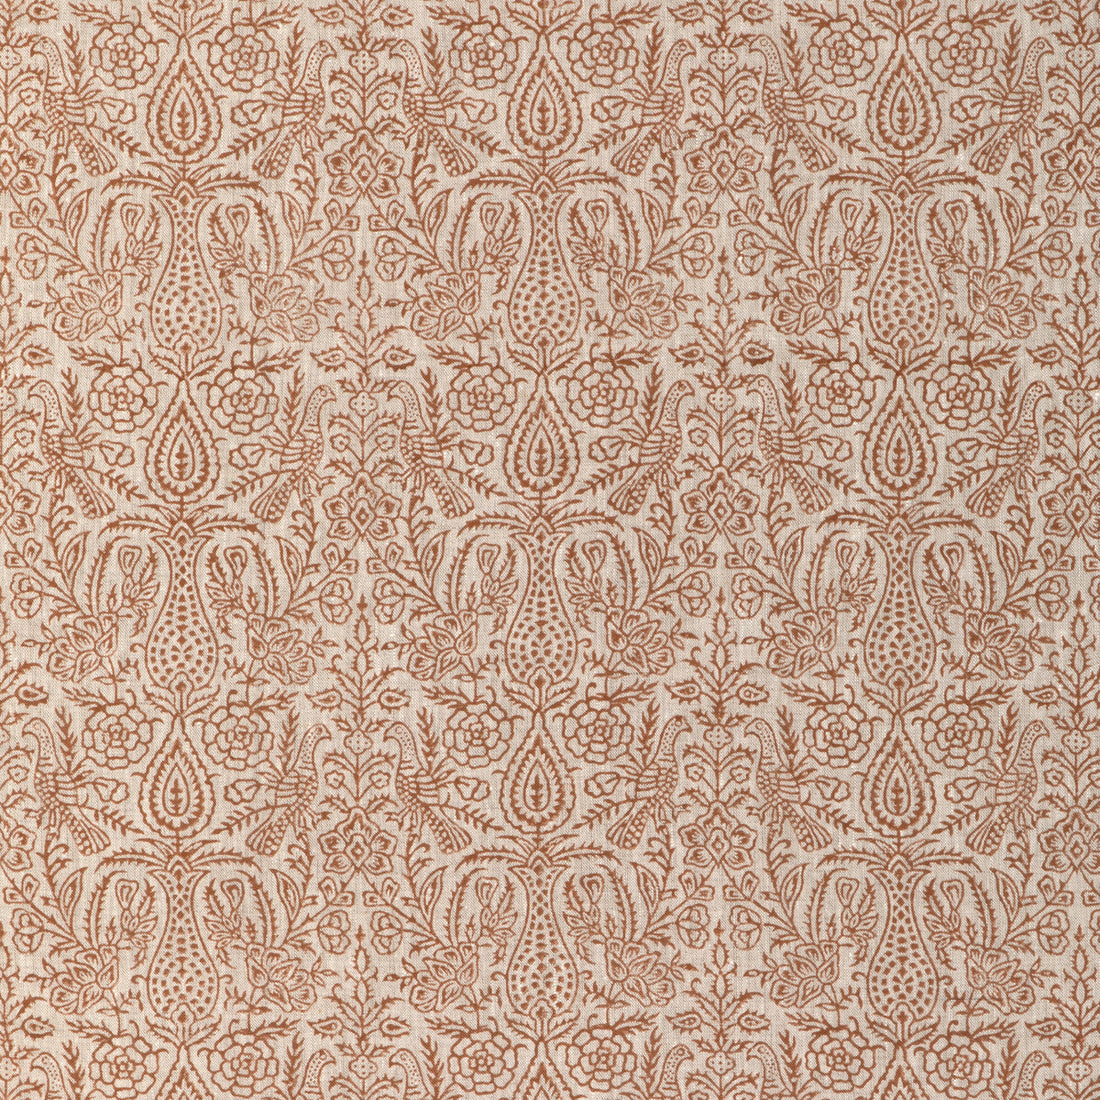 Haven Handblock fabric in spice color - pattern 2023101.12.0 - by Lee Jofa in the Clare Prints collection